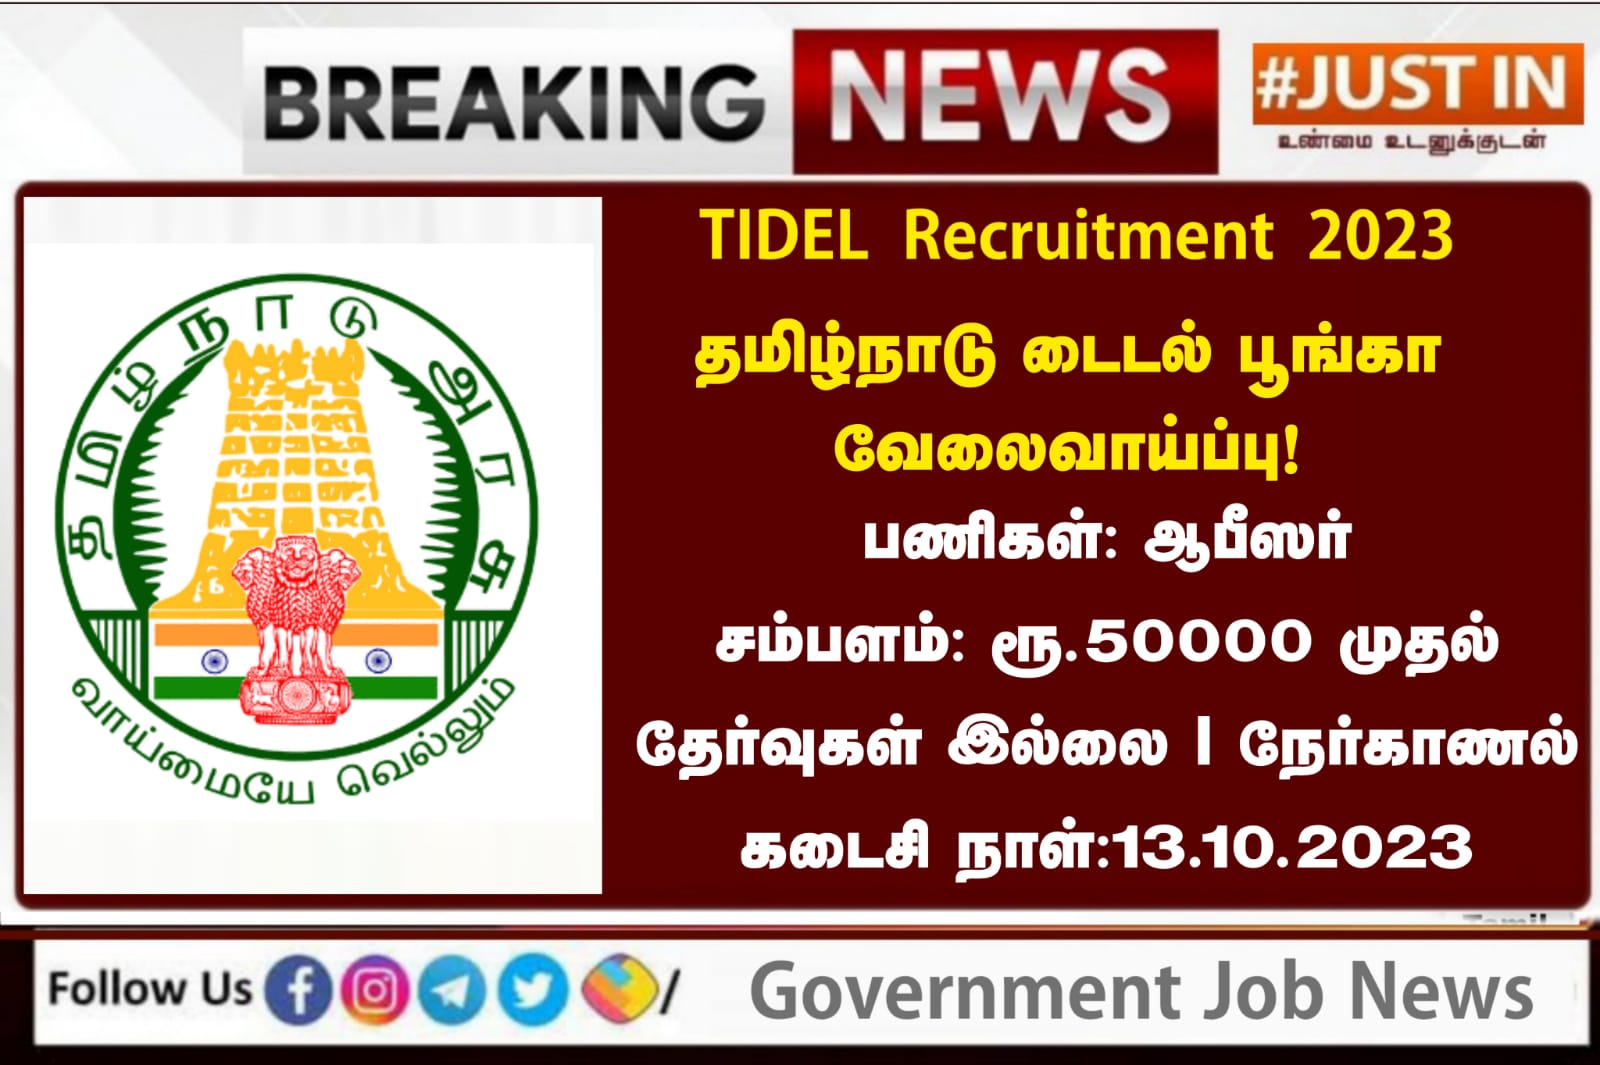 Unlocking Career Opportunities: TIDEL Recruitment 2023 - Apply Now for AE and Manager Positions